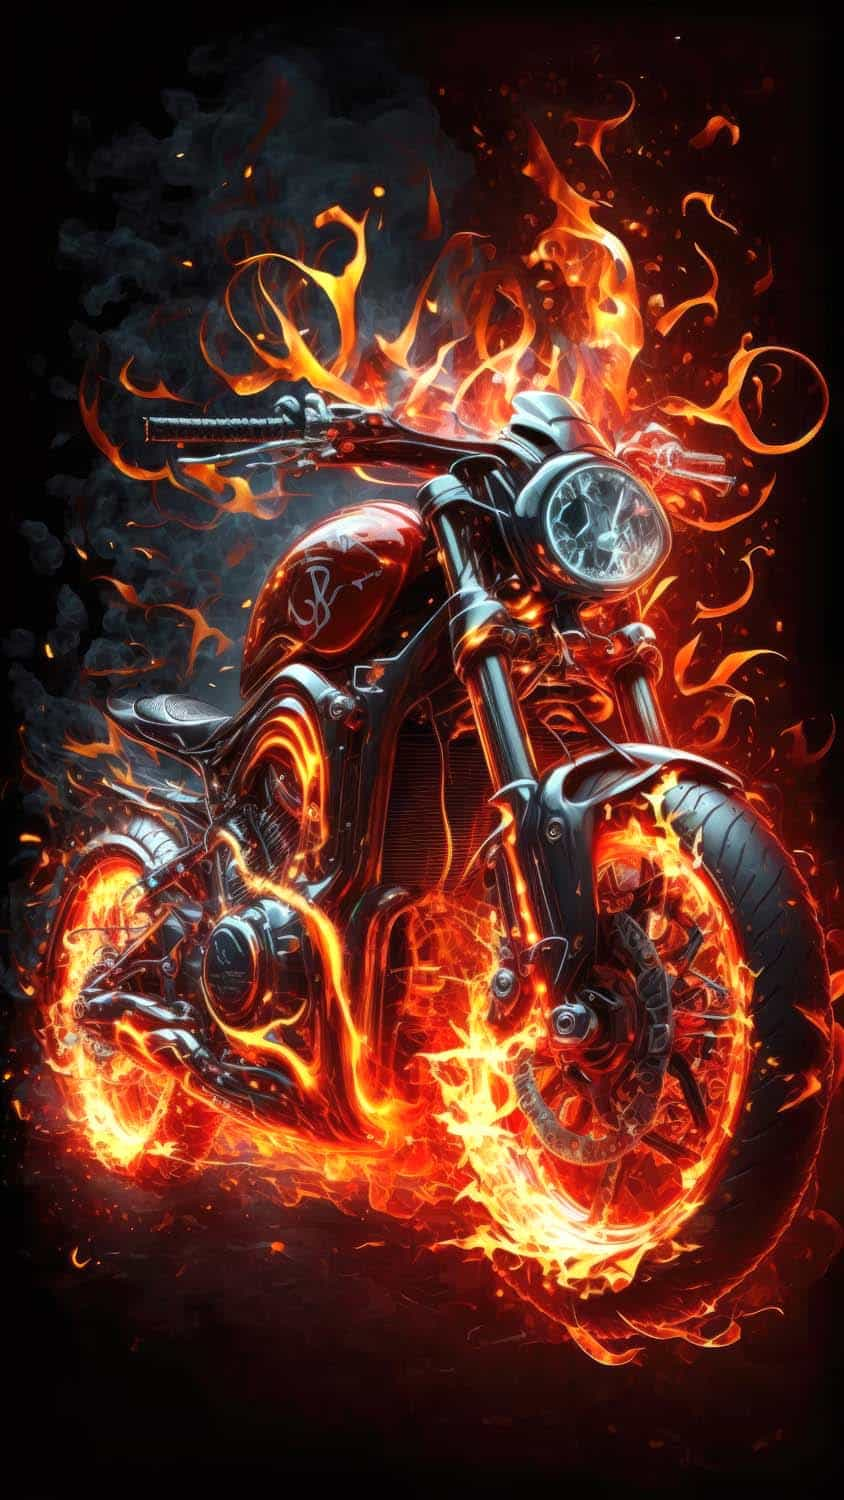 Ghost Rider Motorcycle IPhone Wallpaper HD  IPhone Wallpapers